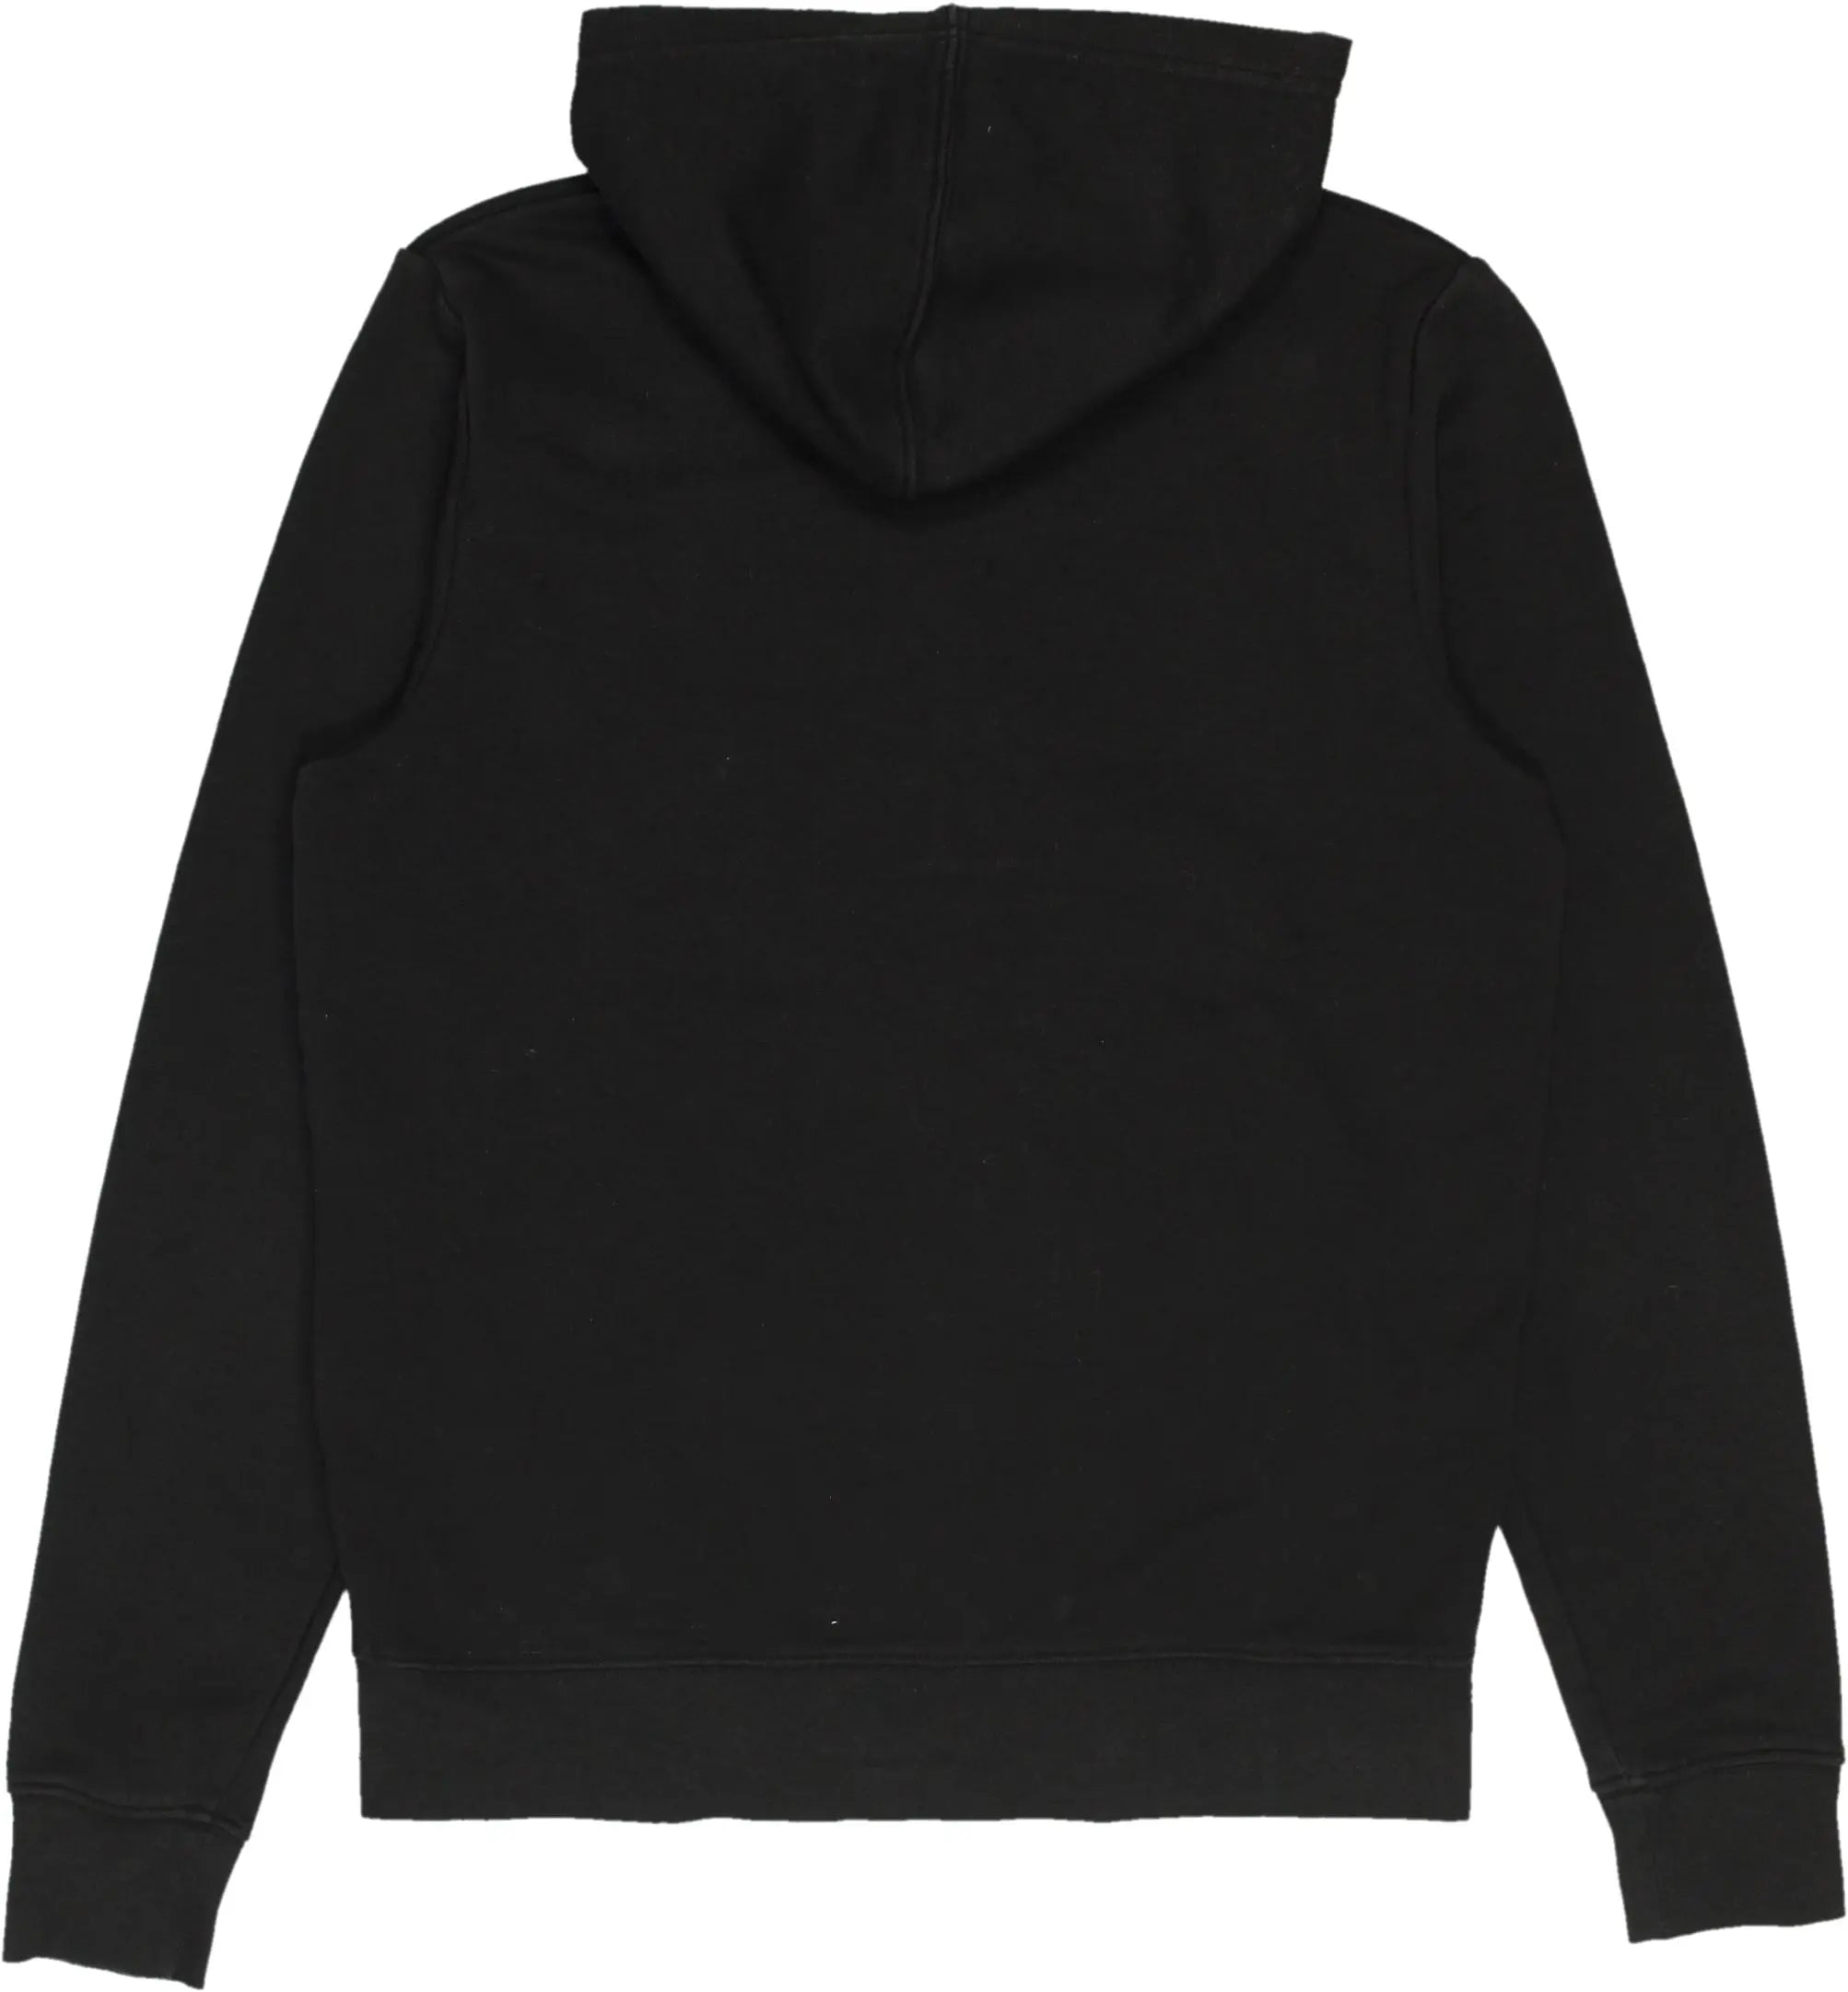 Kappa - Zip Up Hoodie by Kappa- ThriftTale.com - Vintage and second handclothing